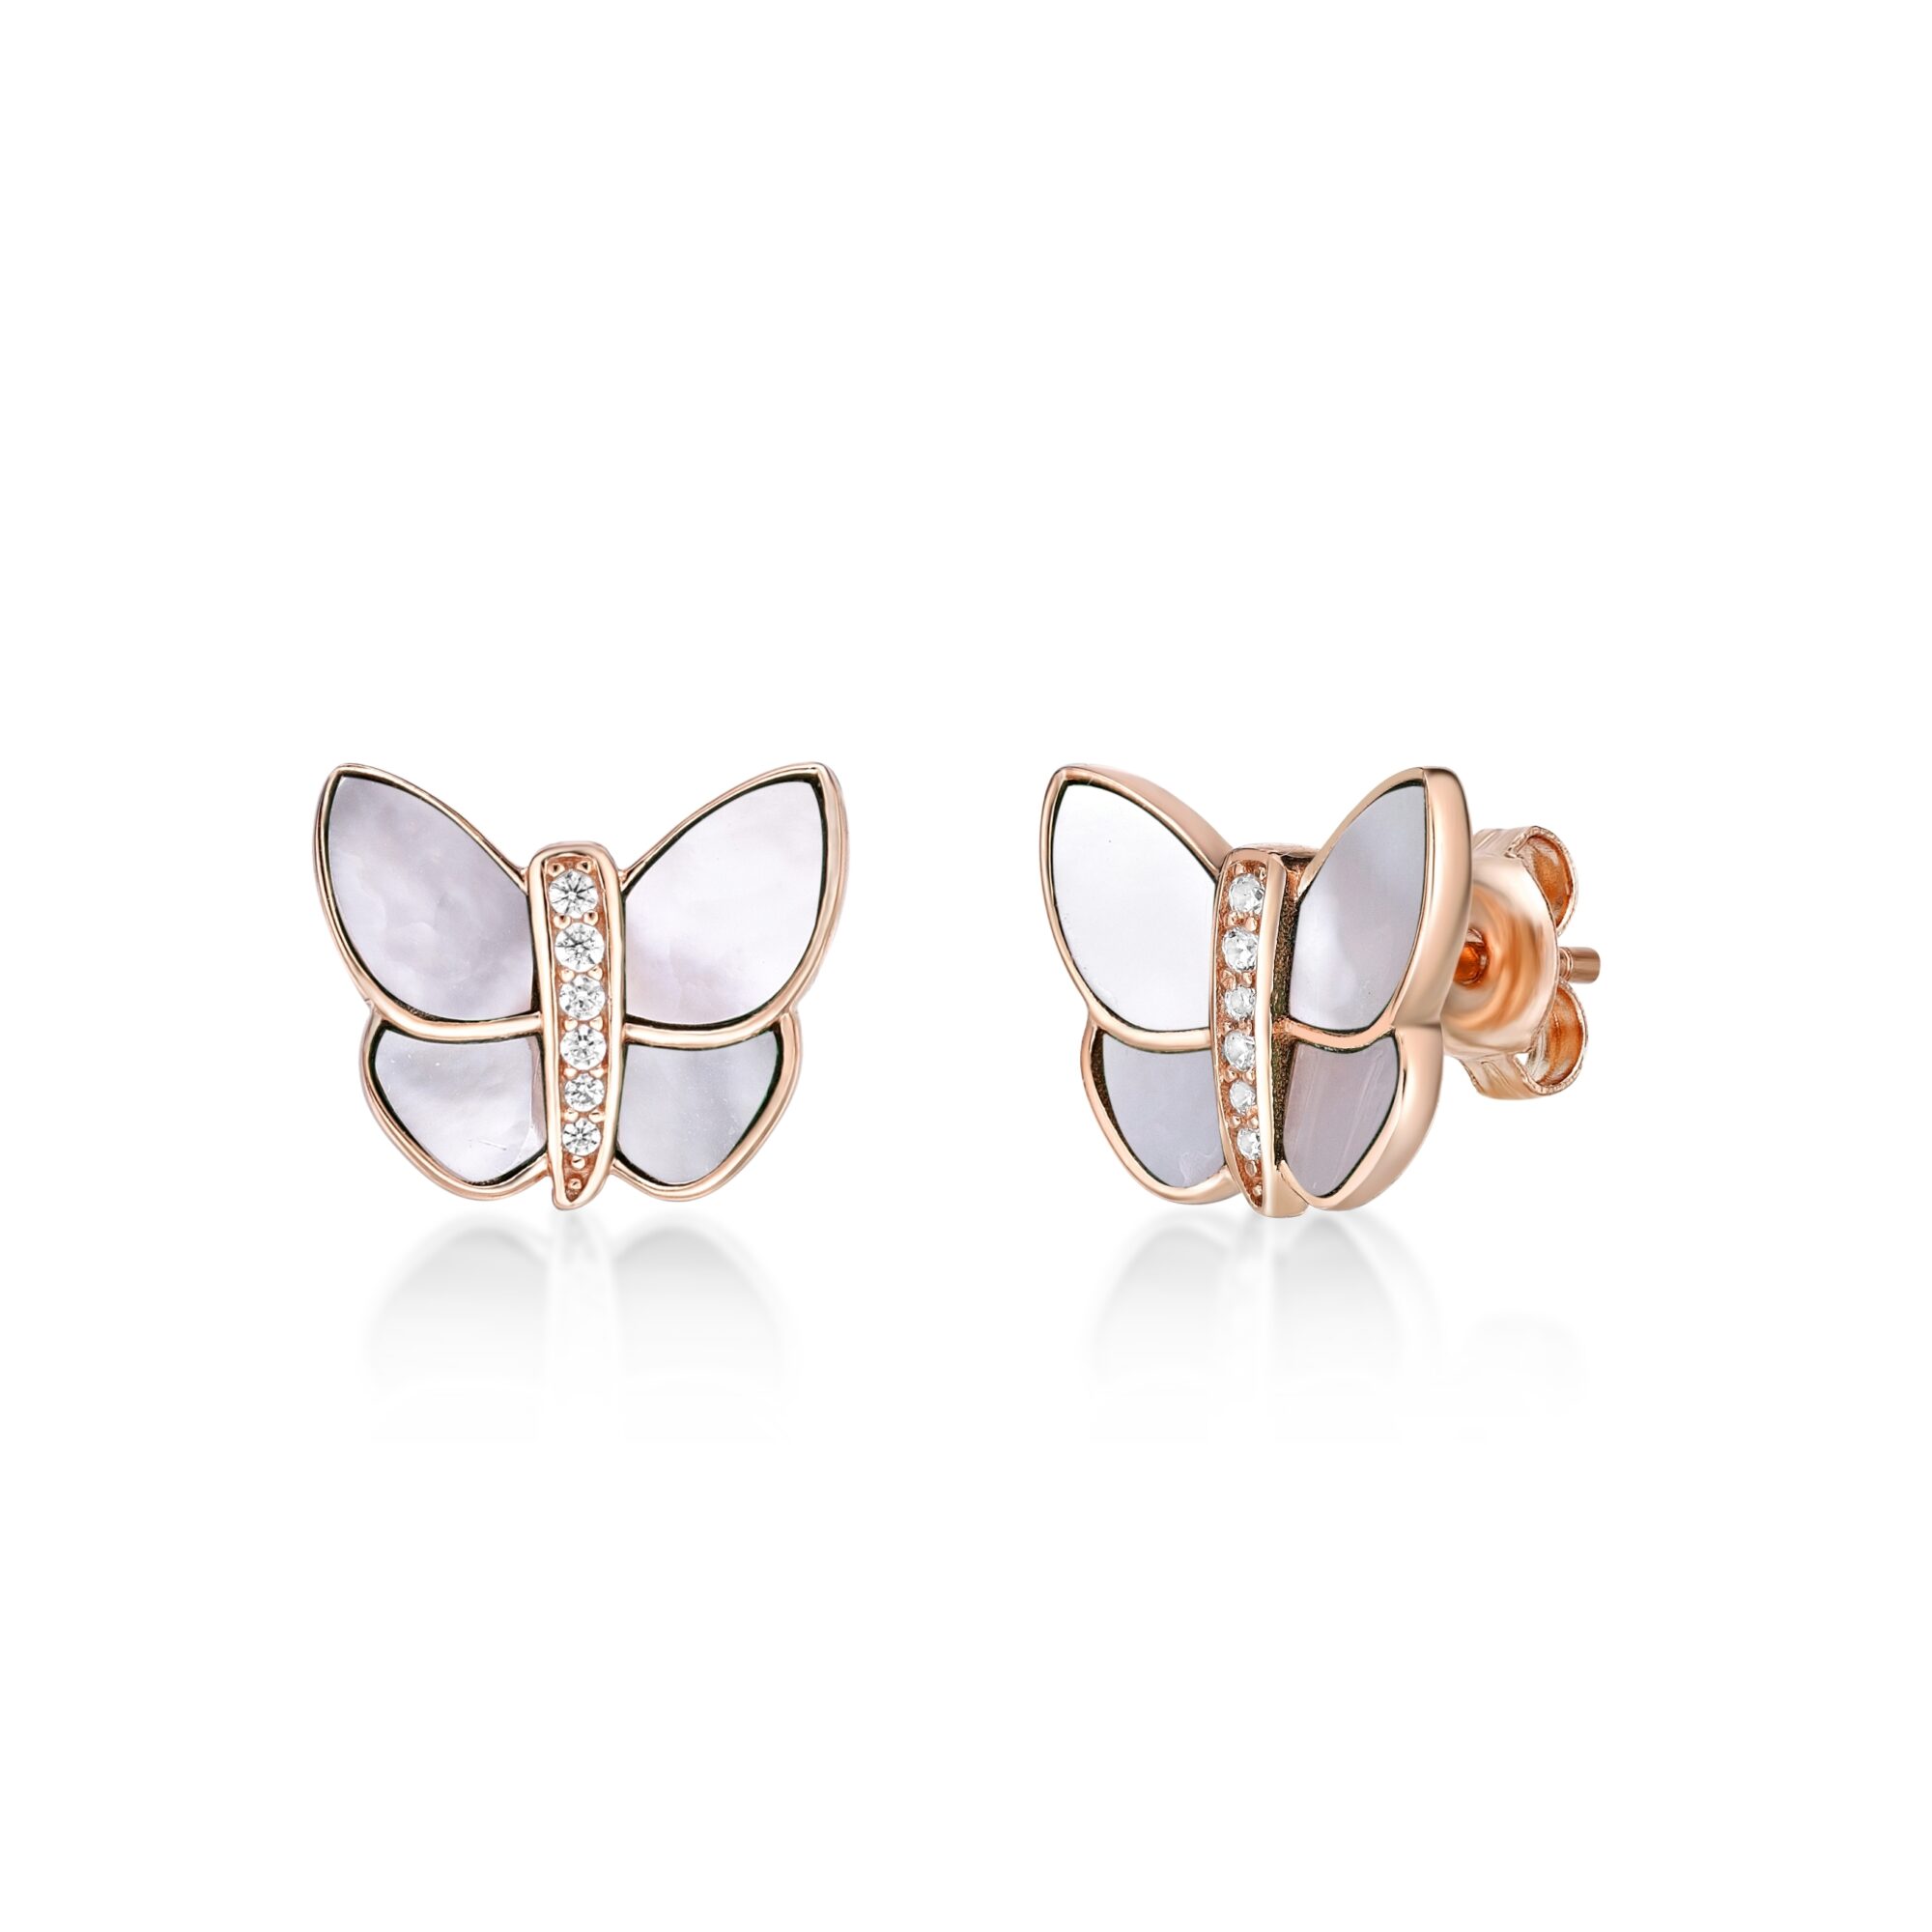 Lavari Jewelers Women’s Mother of Pearl Butterfly Stud Earrings with Friction Back, 925 Sterling Silver, Cubic Zirconia